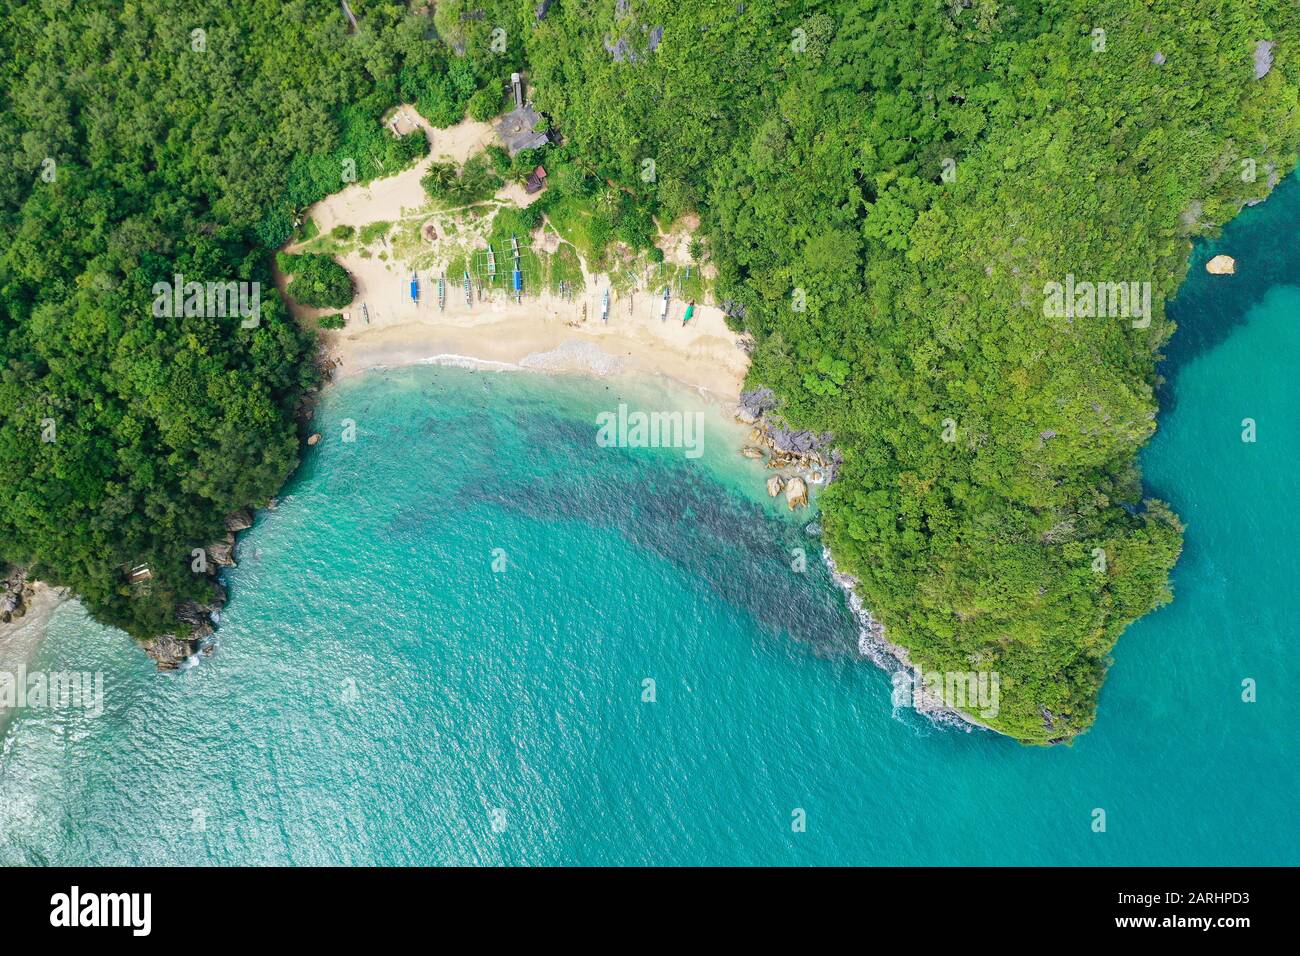 white sand beach. Rocky island with a jungle and a turquoise lagoon, aerial view. Caramoan Islands, Philippines. Summer and travel vacation concept. Stock Photo